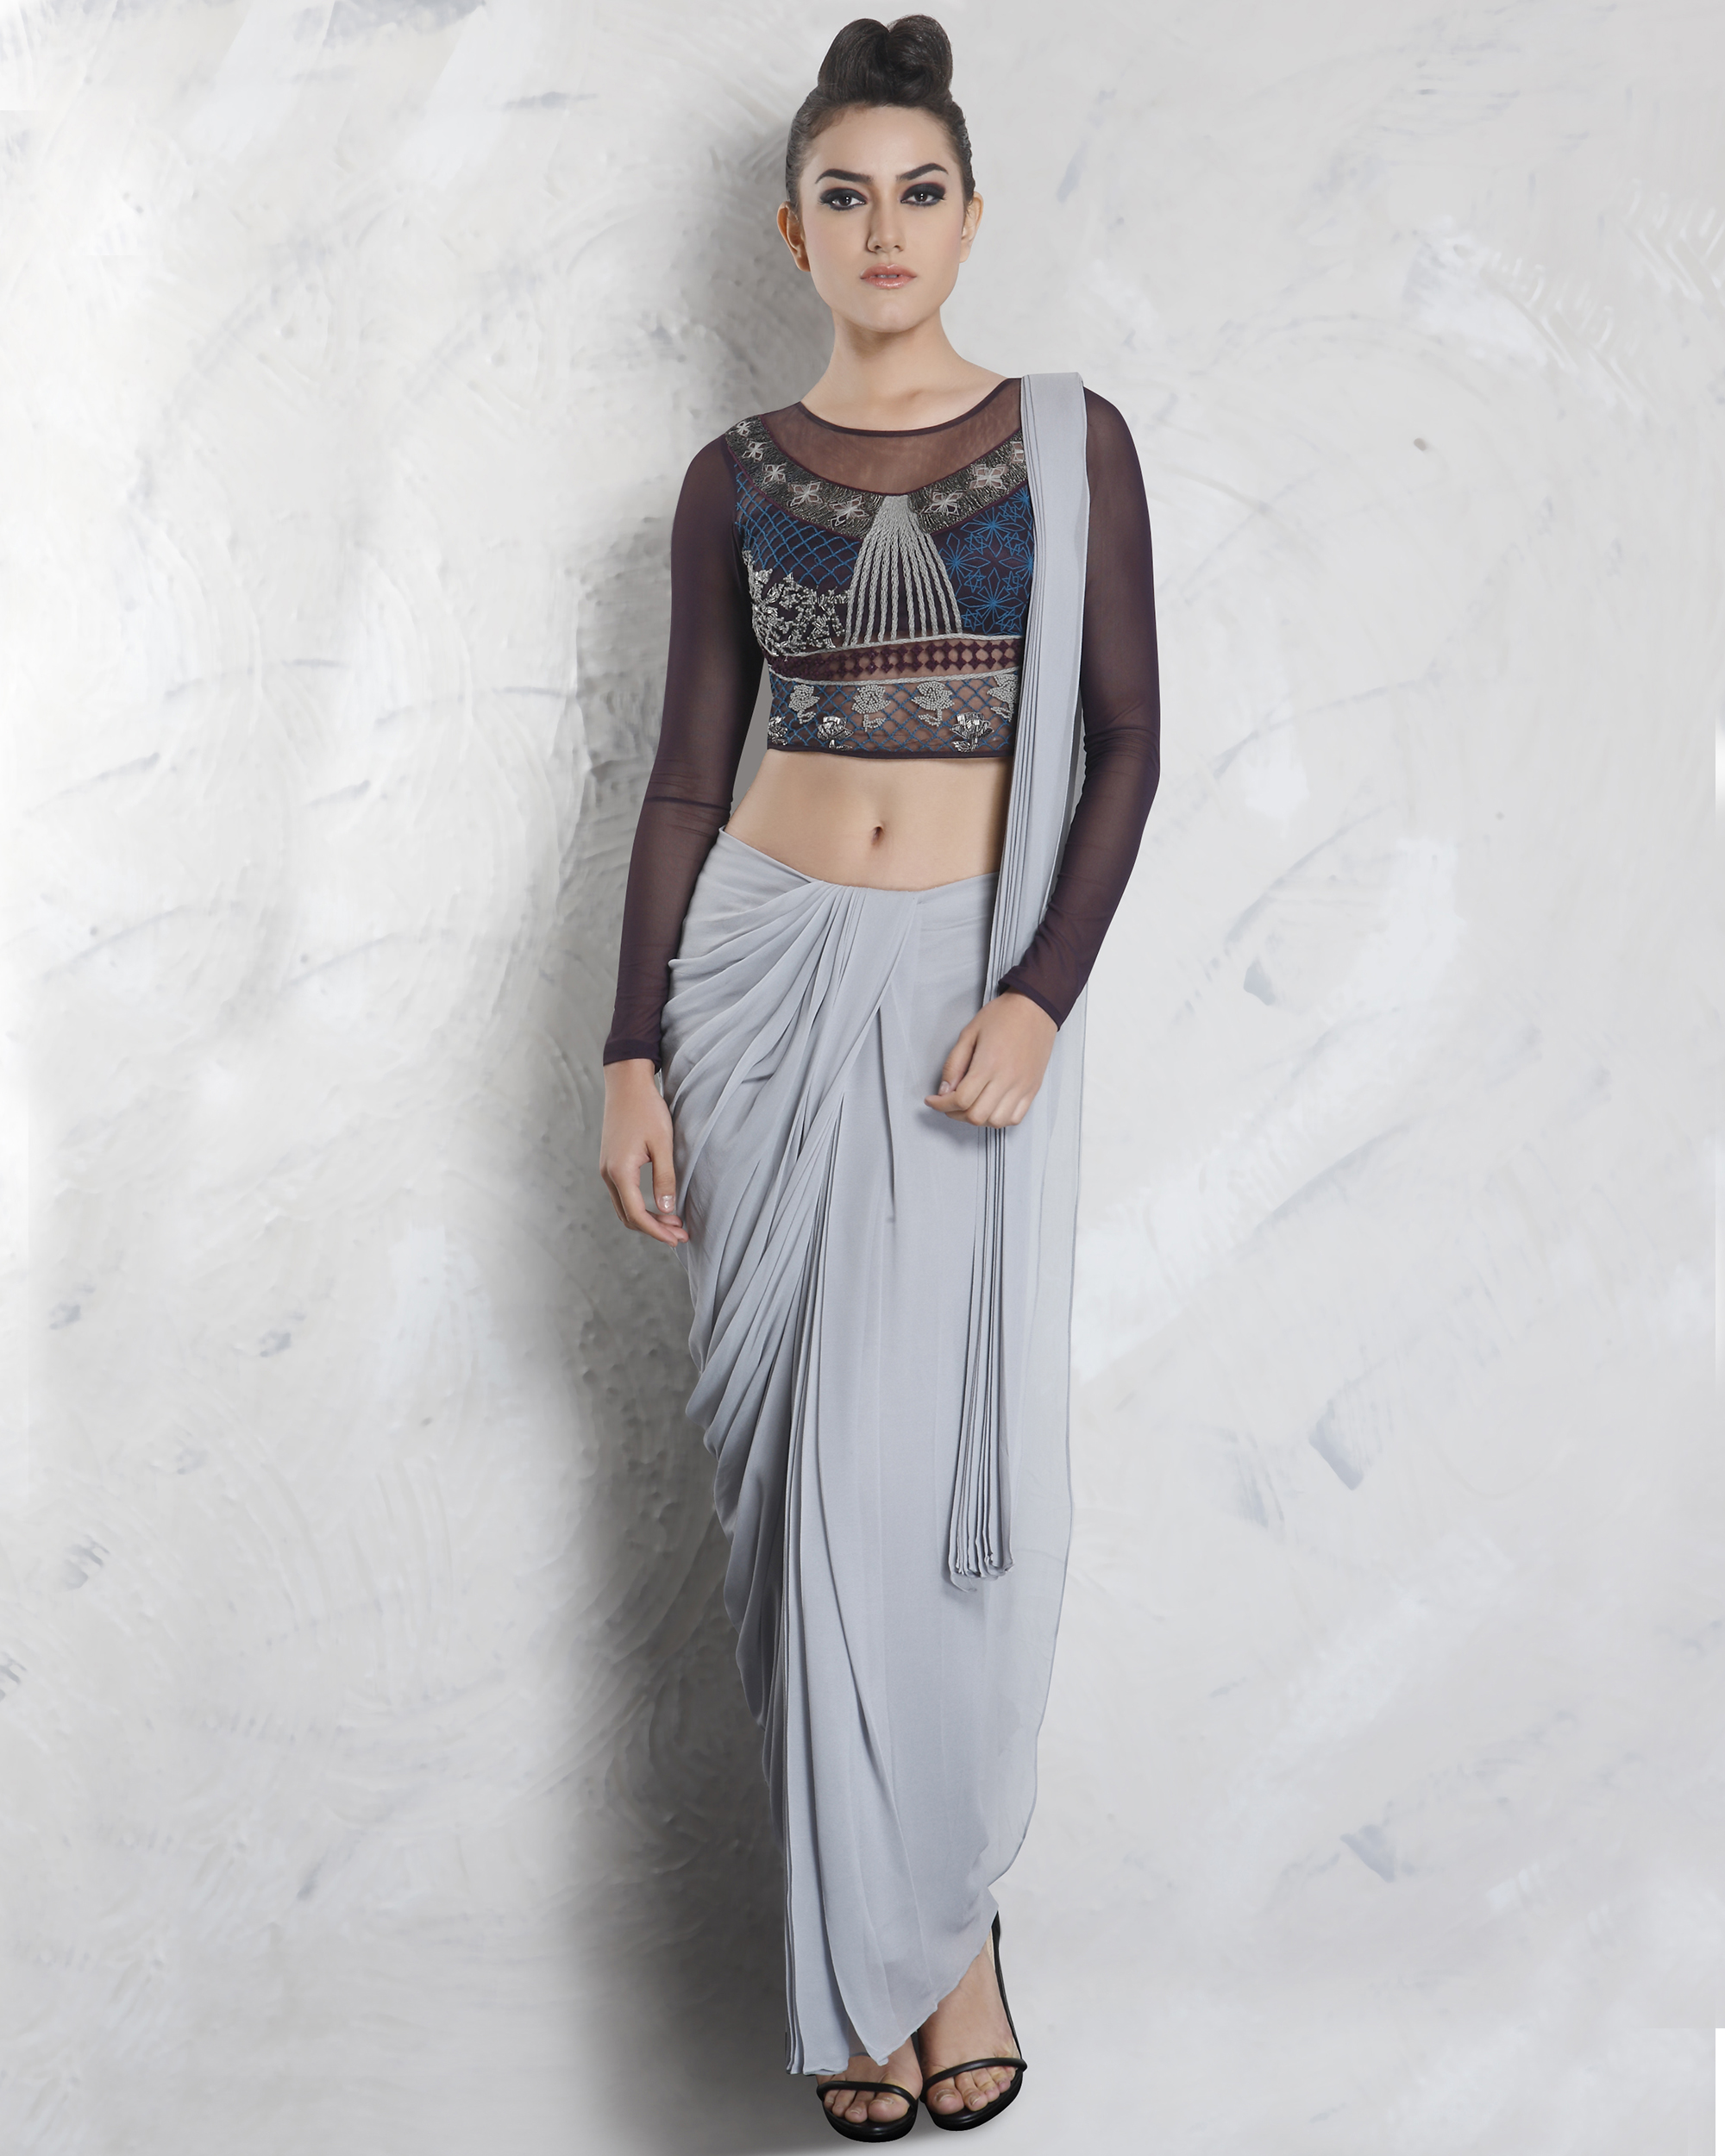 SIMPLE SAREE LOOK FOR PARTY
 SIMPLE SAREE WITH CROP TOP